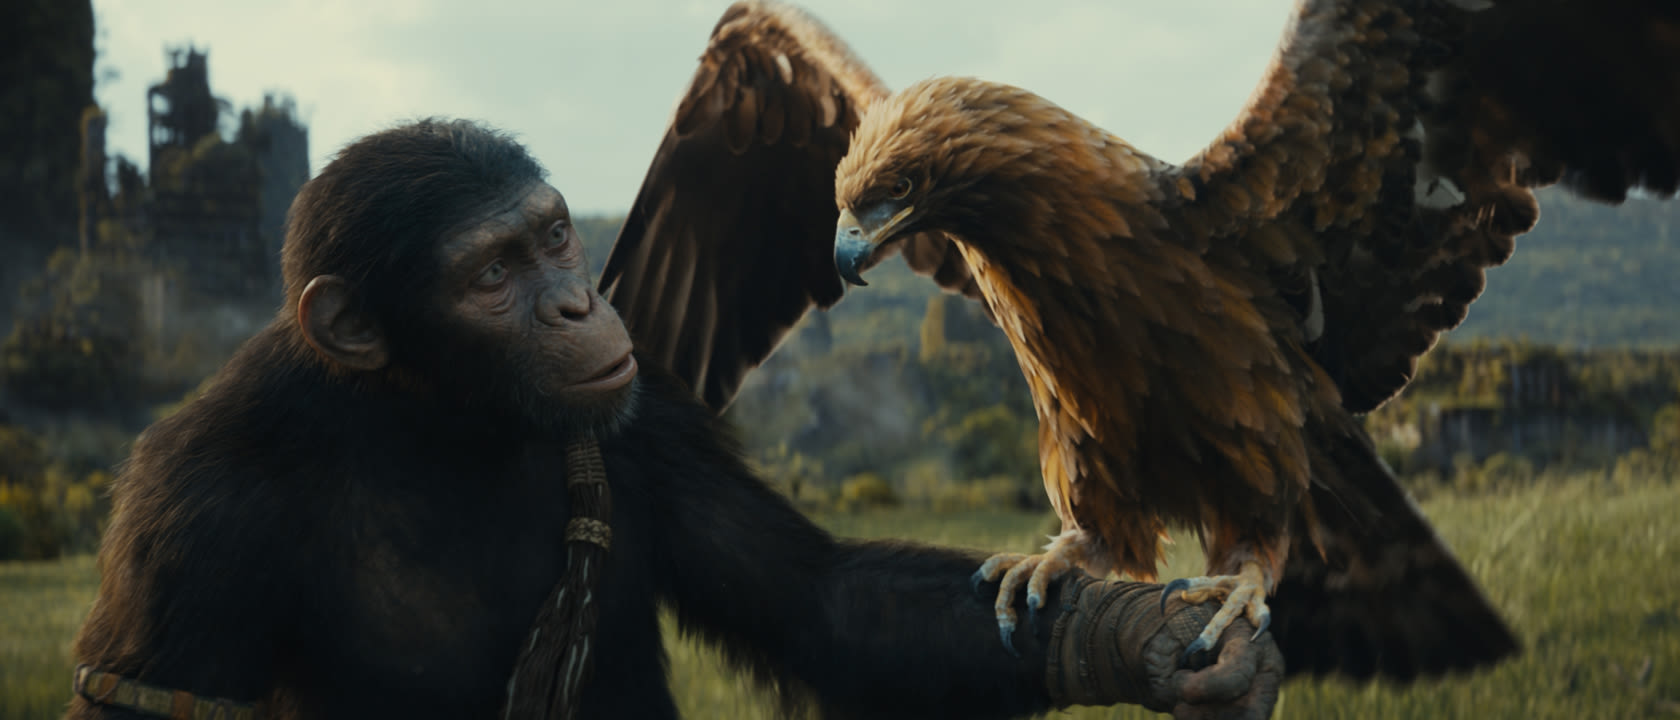 Kingdom Of The Planet Of The Apes Review: While Not Hitting The Heights Of The Caesar Trilogy, The New...